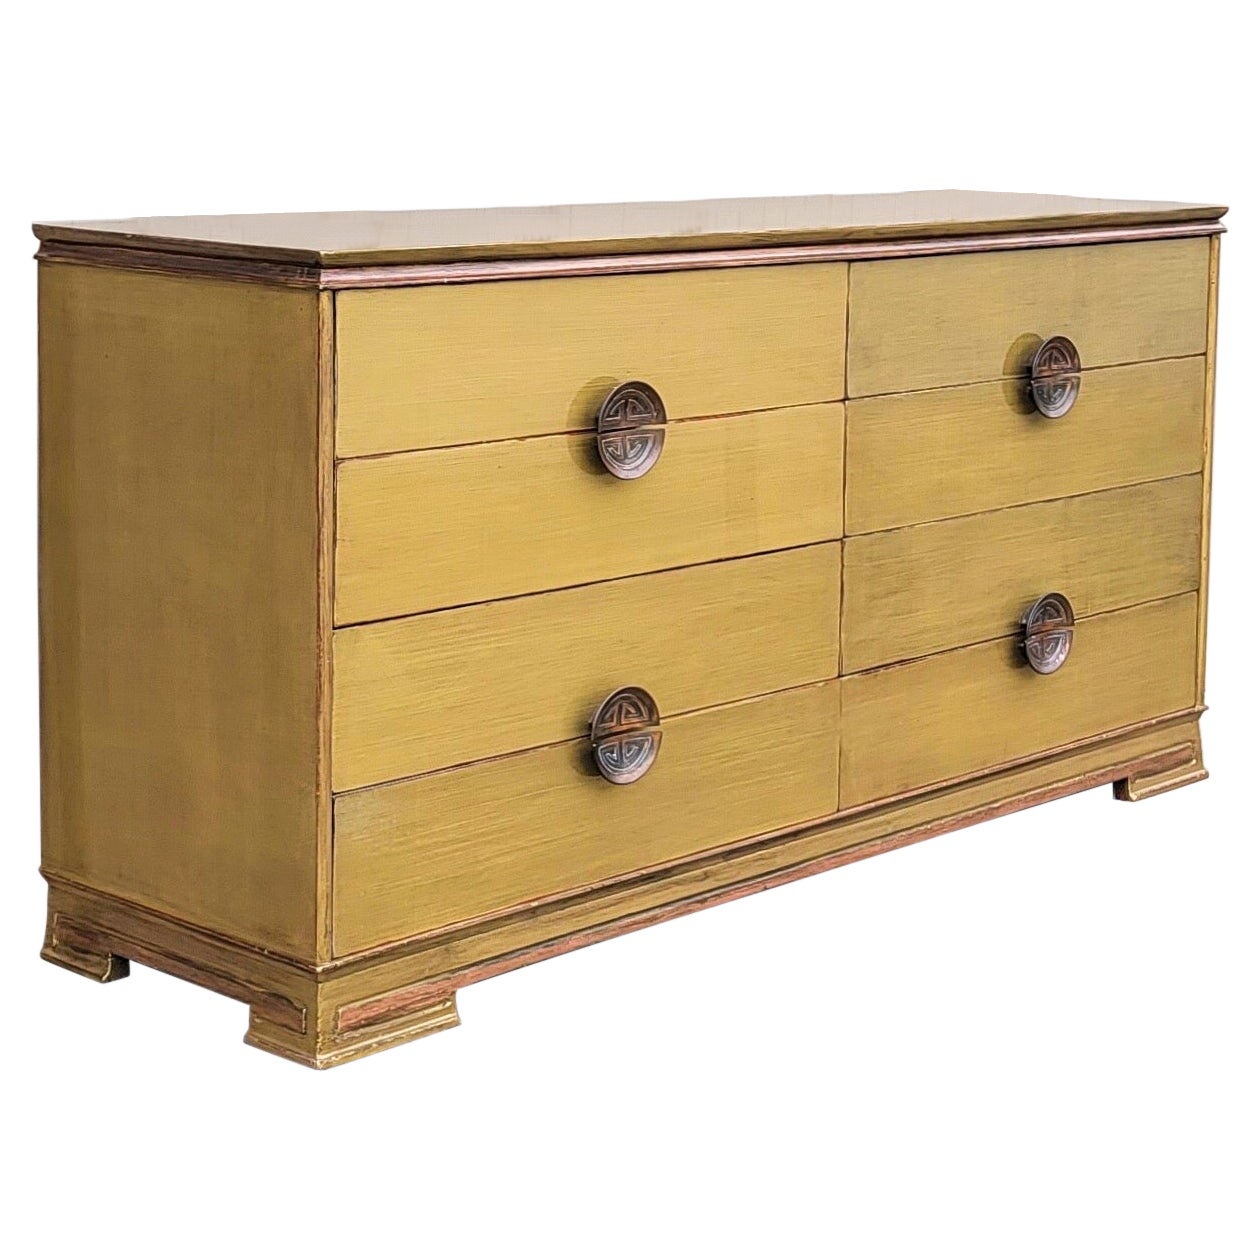 Mid-Century Modern Gilt Lacquered Credenza / Chest Attributed to James Mont